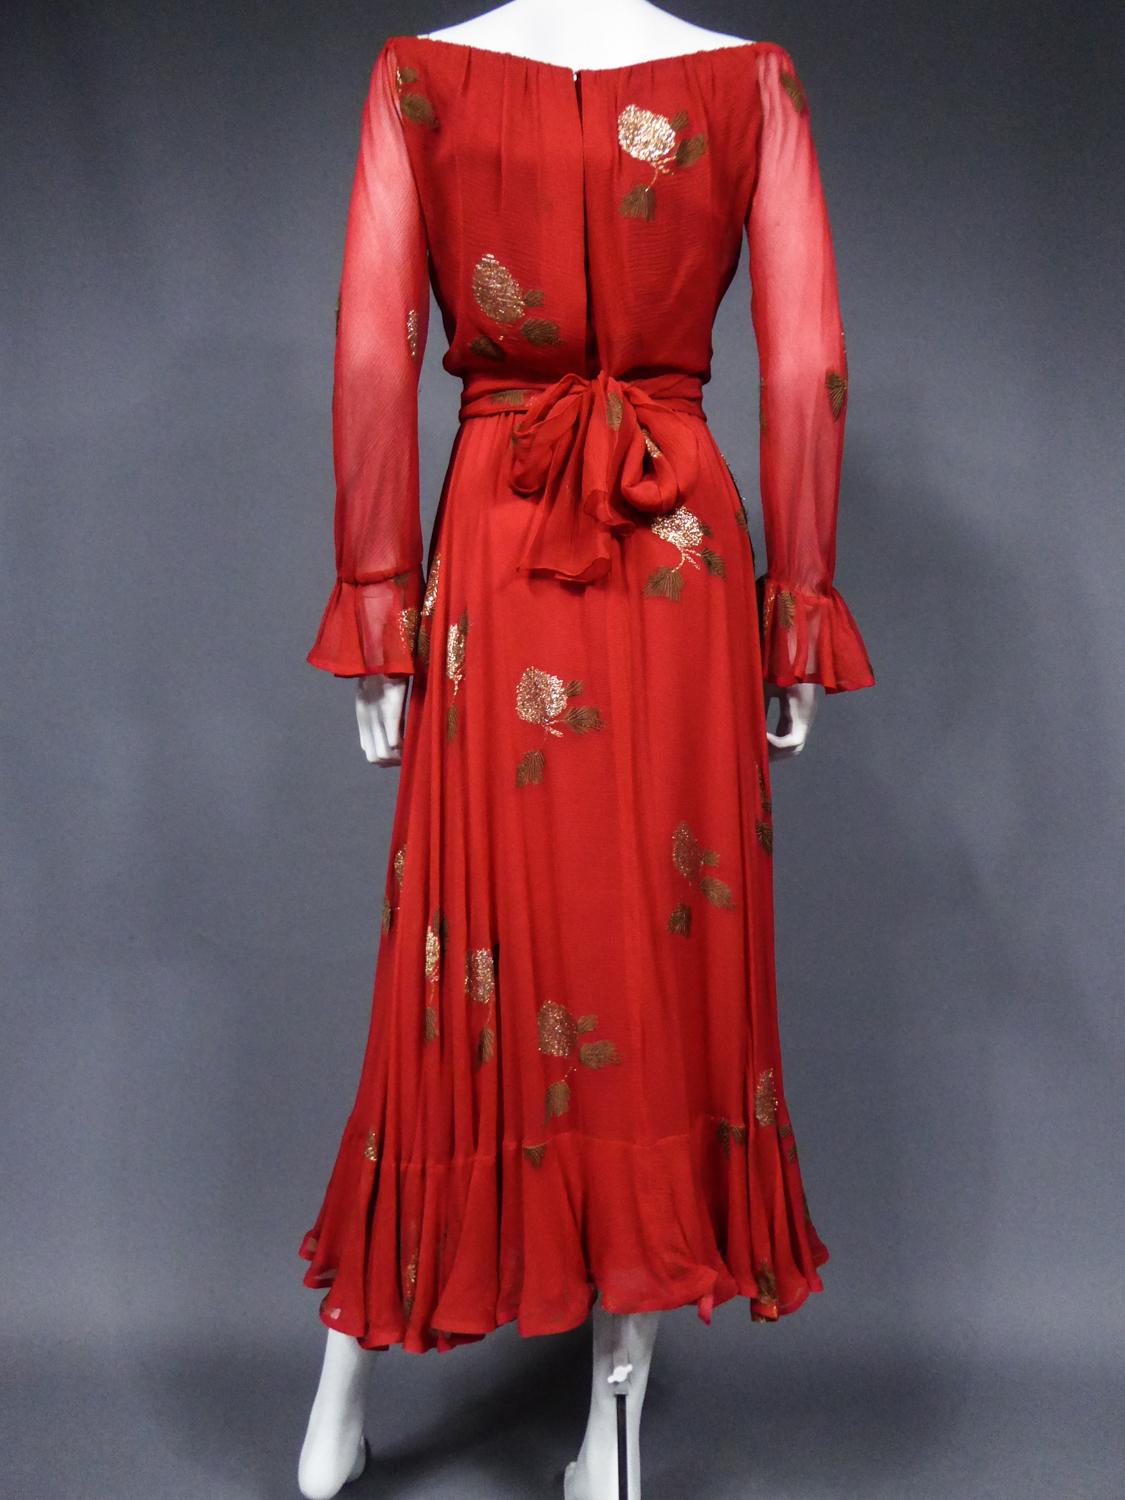 A Jean Patou French Couture Dress Numbered 98427 in Lamé Crepe Collection 1974 For Sale 4